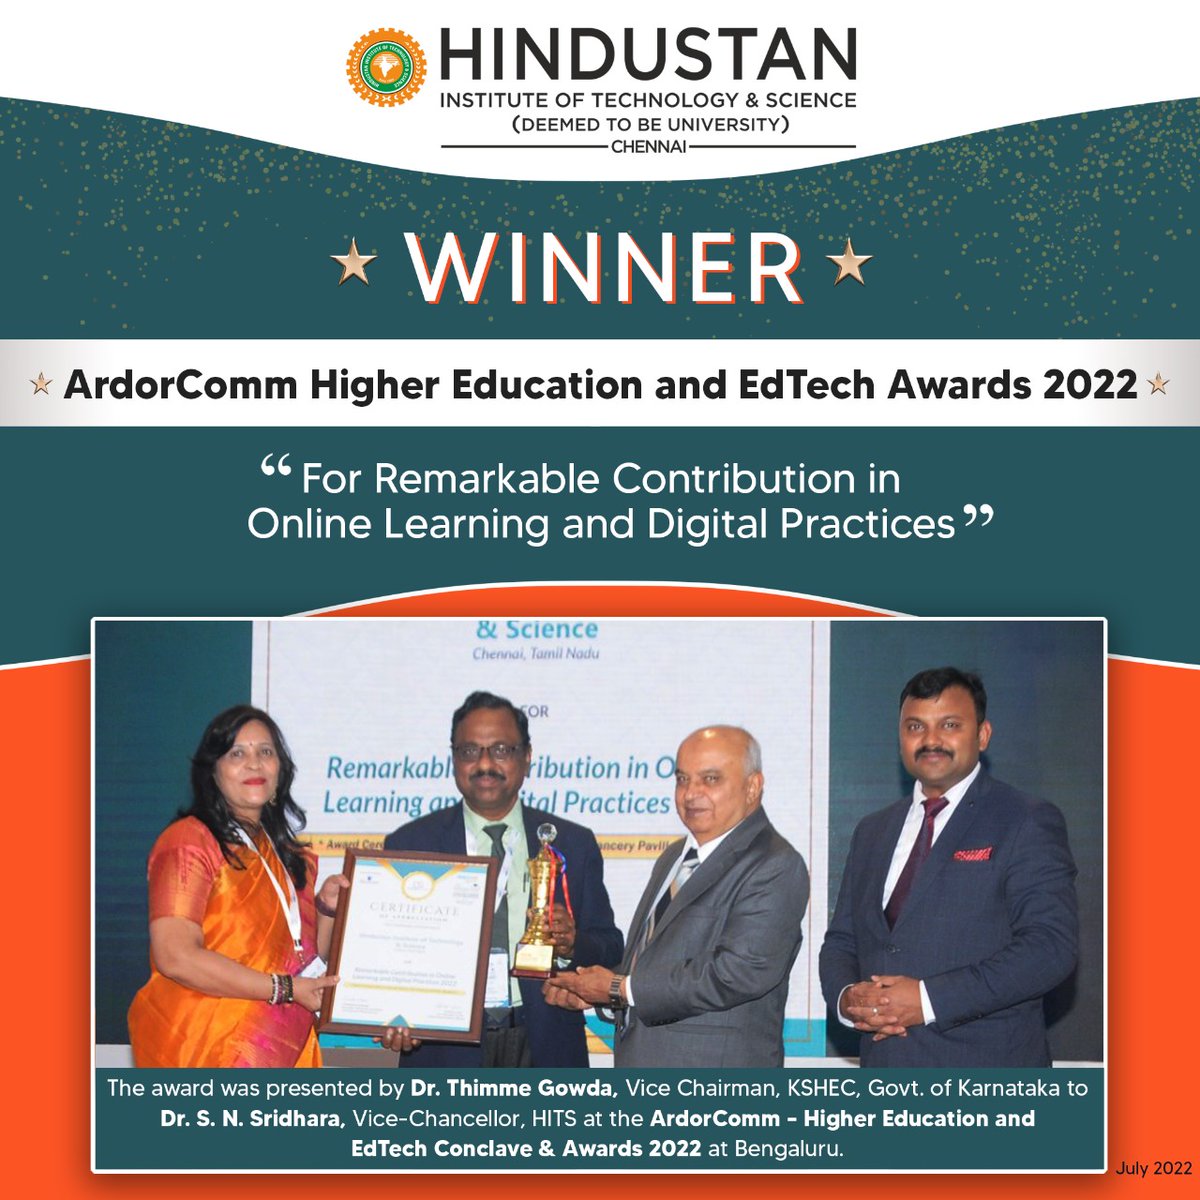 #HITS has been bestowed the #ArdorComm #HigherEducation & #EdTech Award 2022 for its commendable contributions in #OnlineLearning and #DigitalPractices. The award was received by Dr. S.N. Sridhara, Vice-Chancellor, HITS. 
#HindustanUniversity #HEETSouth #HEETBengaluru